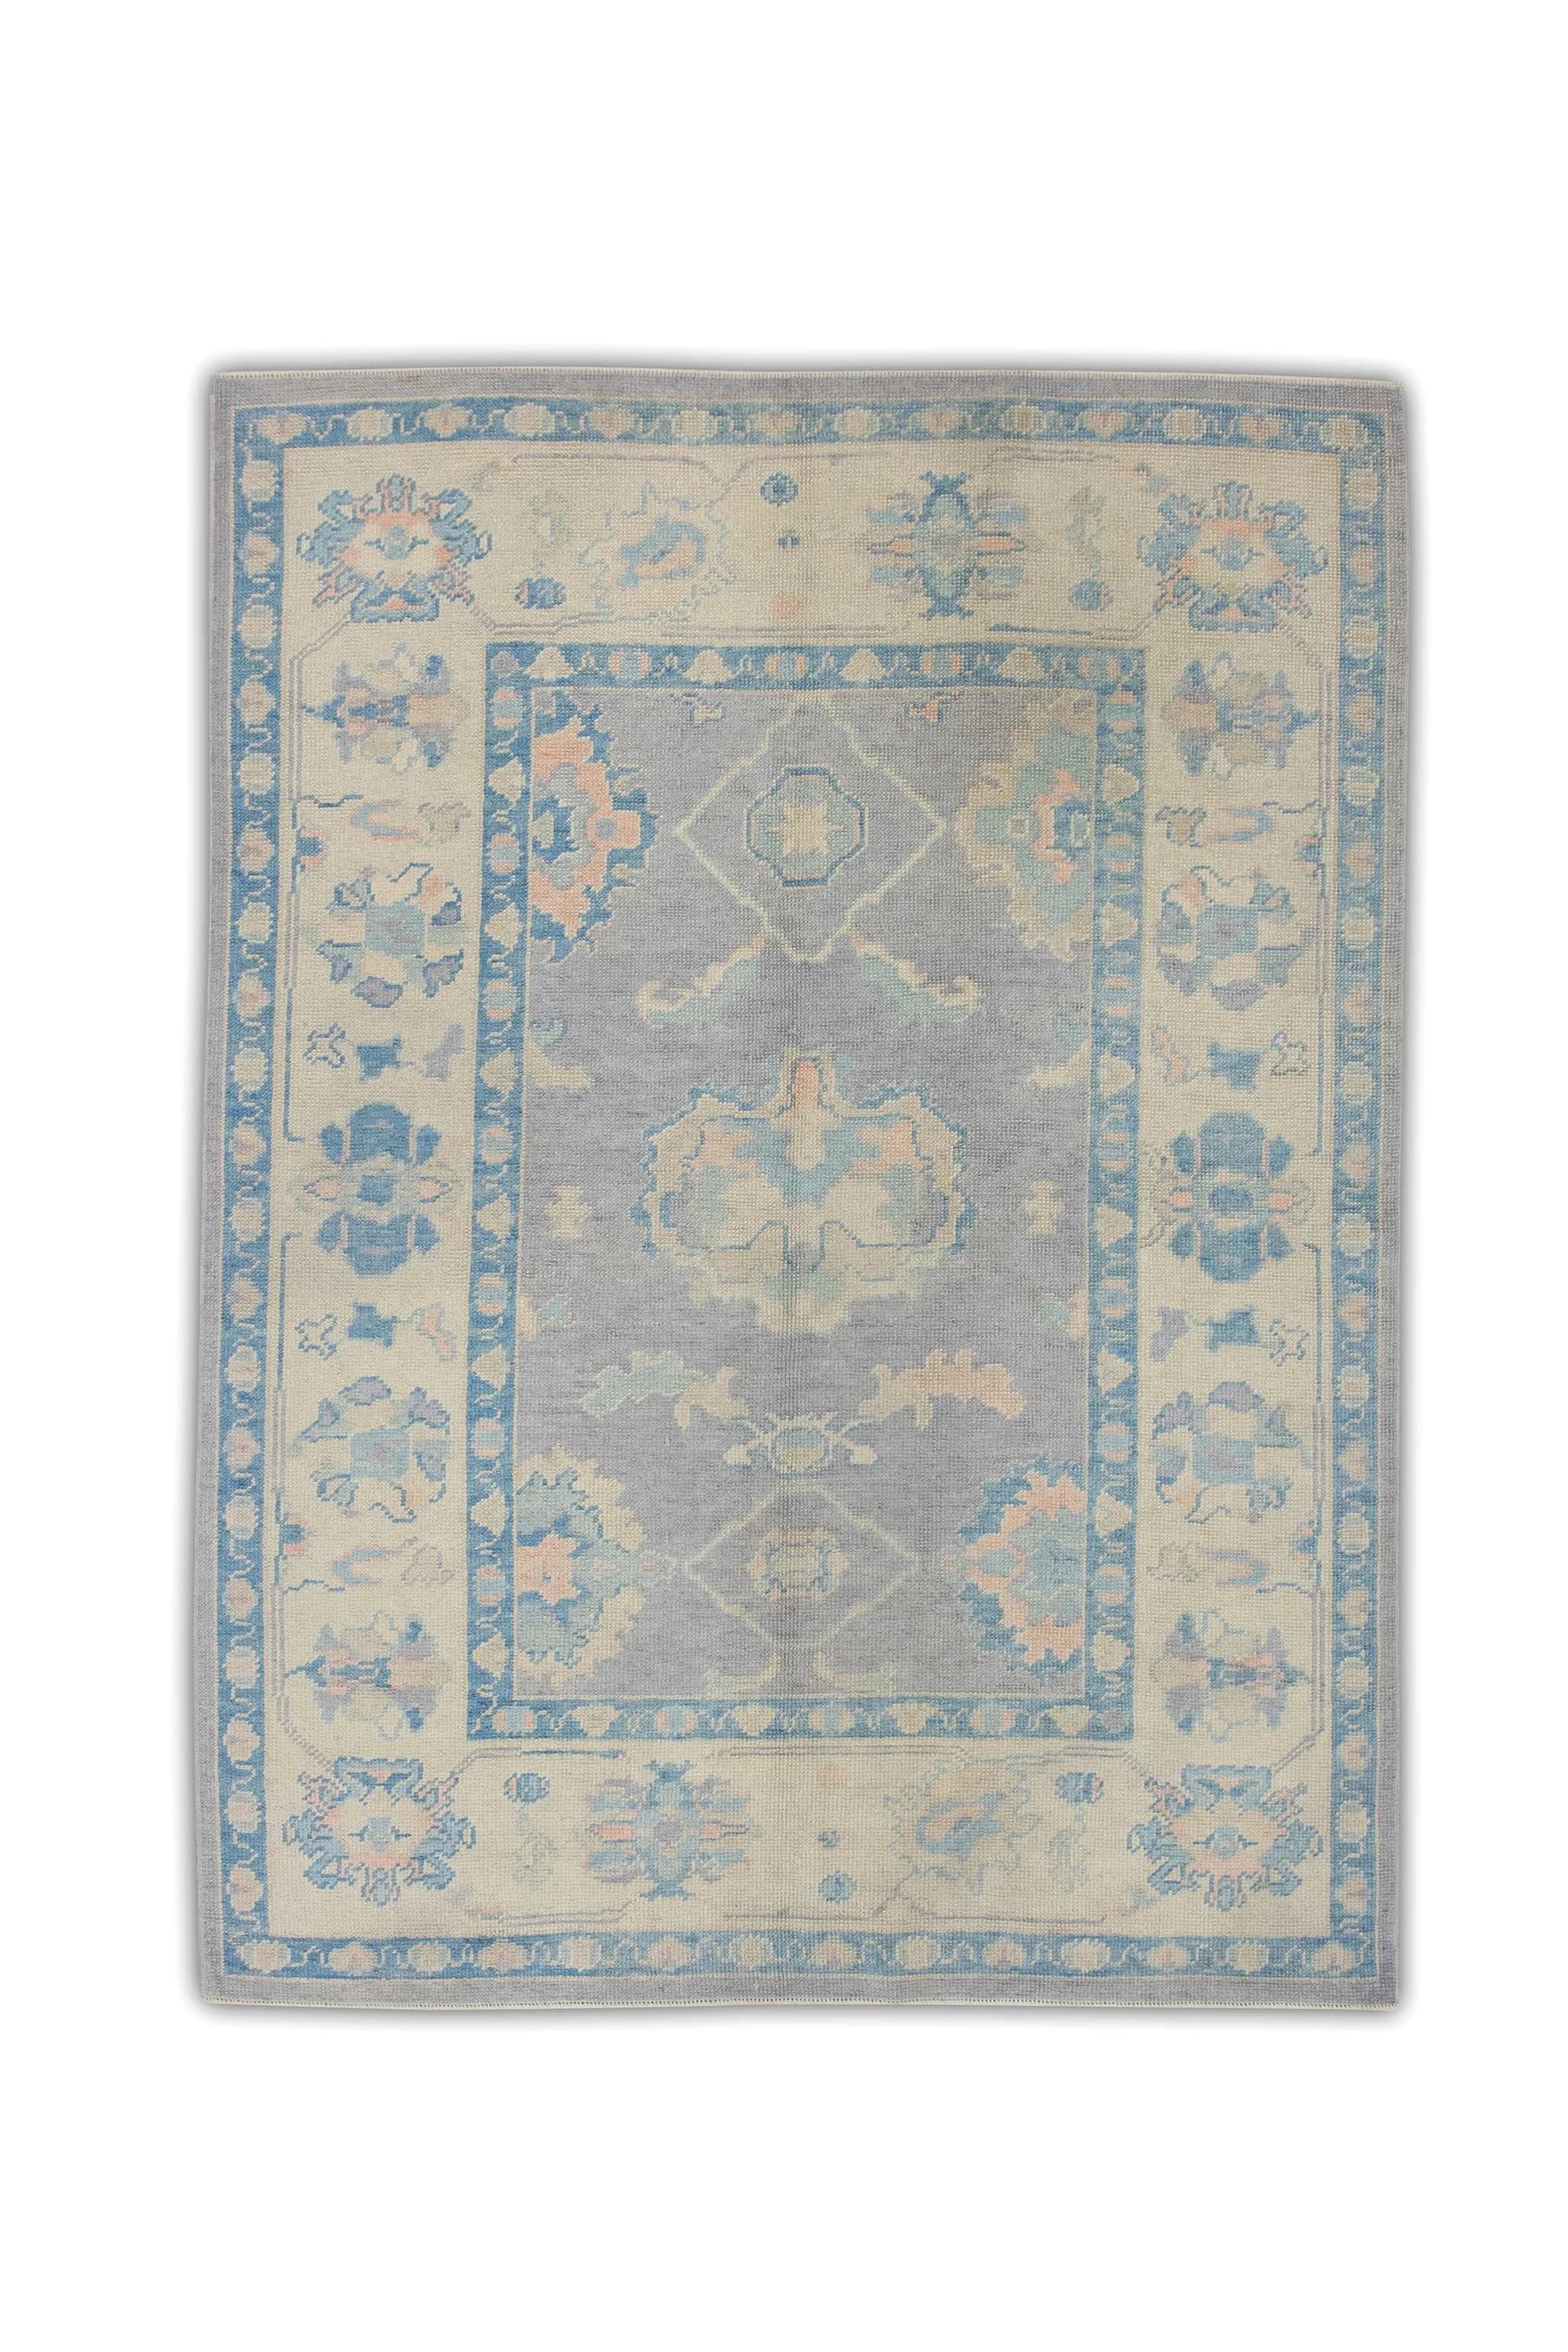 Purple and Blue Floral Handwoven Wool Turkish Oushak Rug 5'3